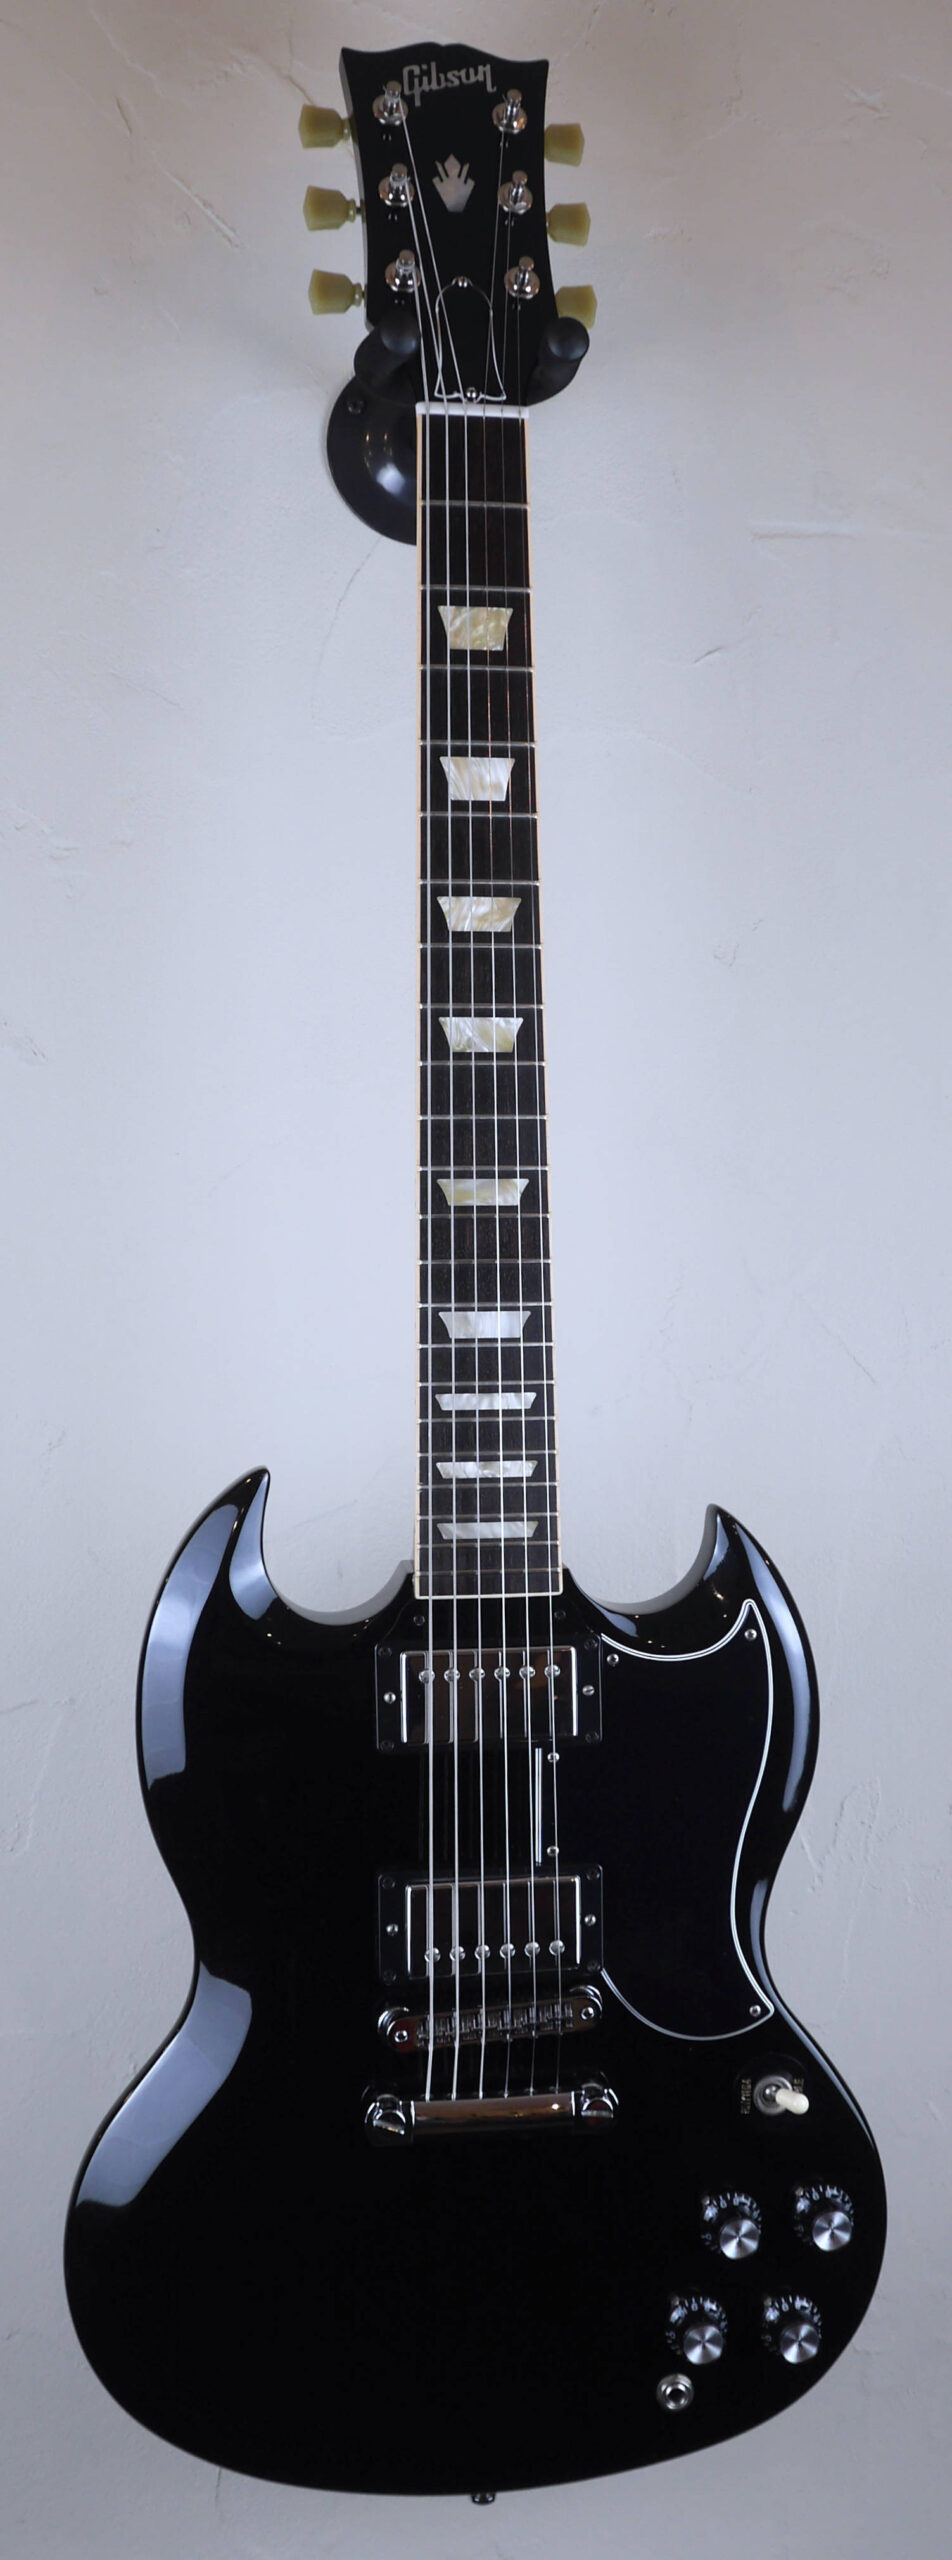 Gibson Limited Edition SG 61 Reissue 06/07/2011 Antique Ebony 2